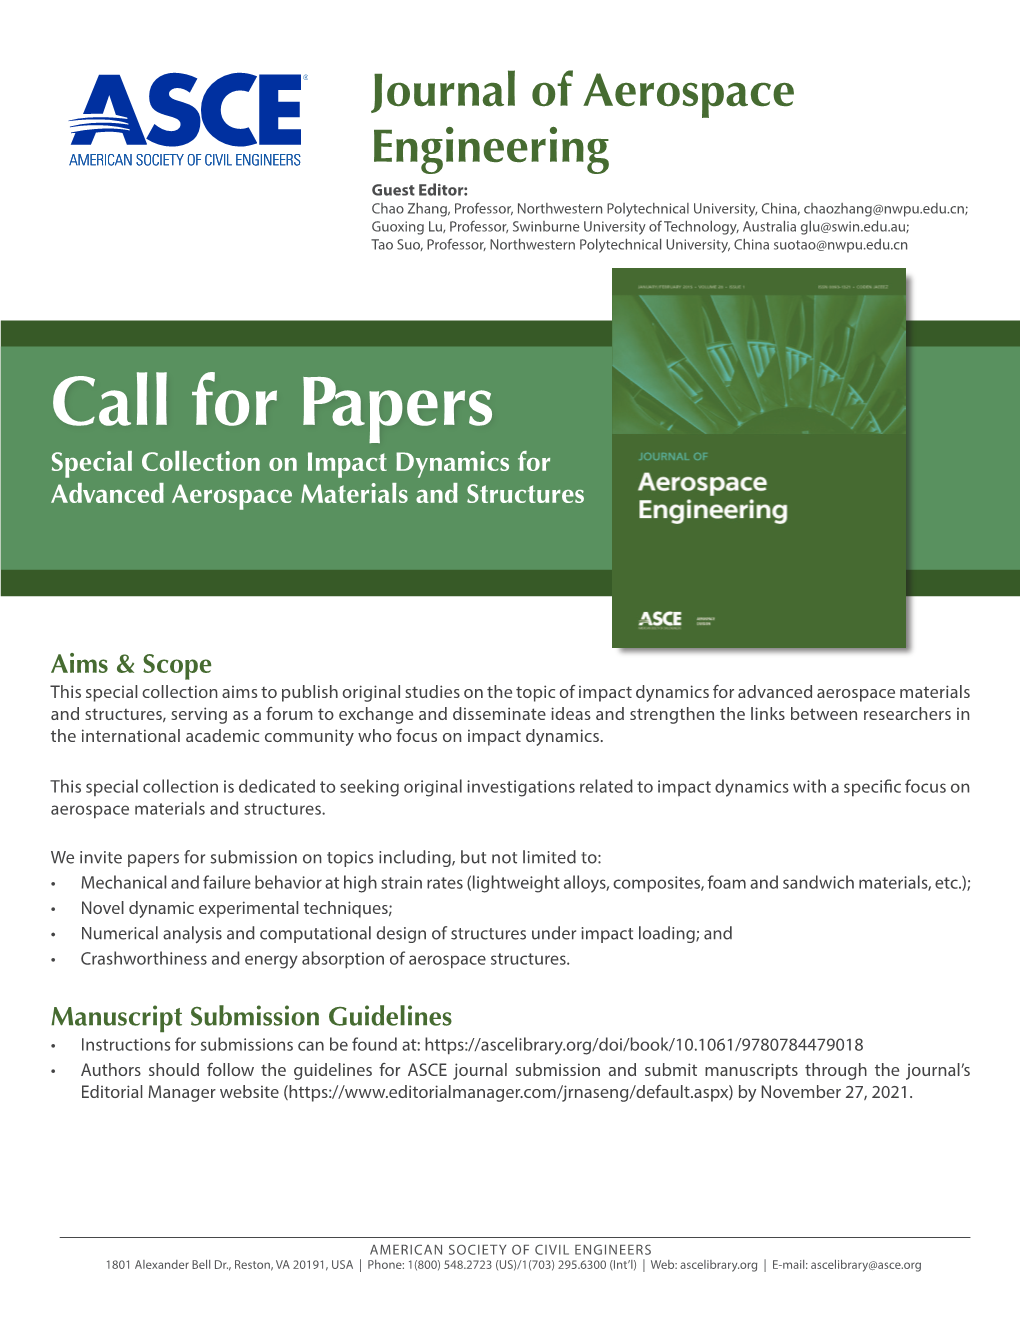 Call for Papers Special Collection on Impact Dynamics for Advanced Aerospace Materials and Structures